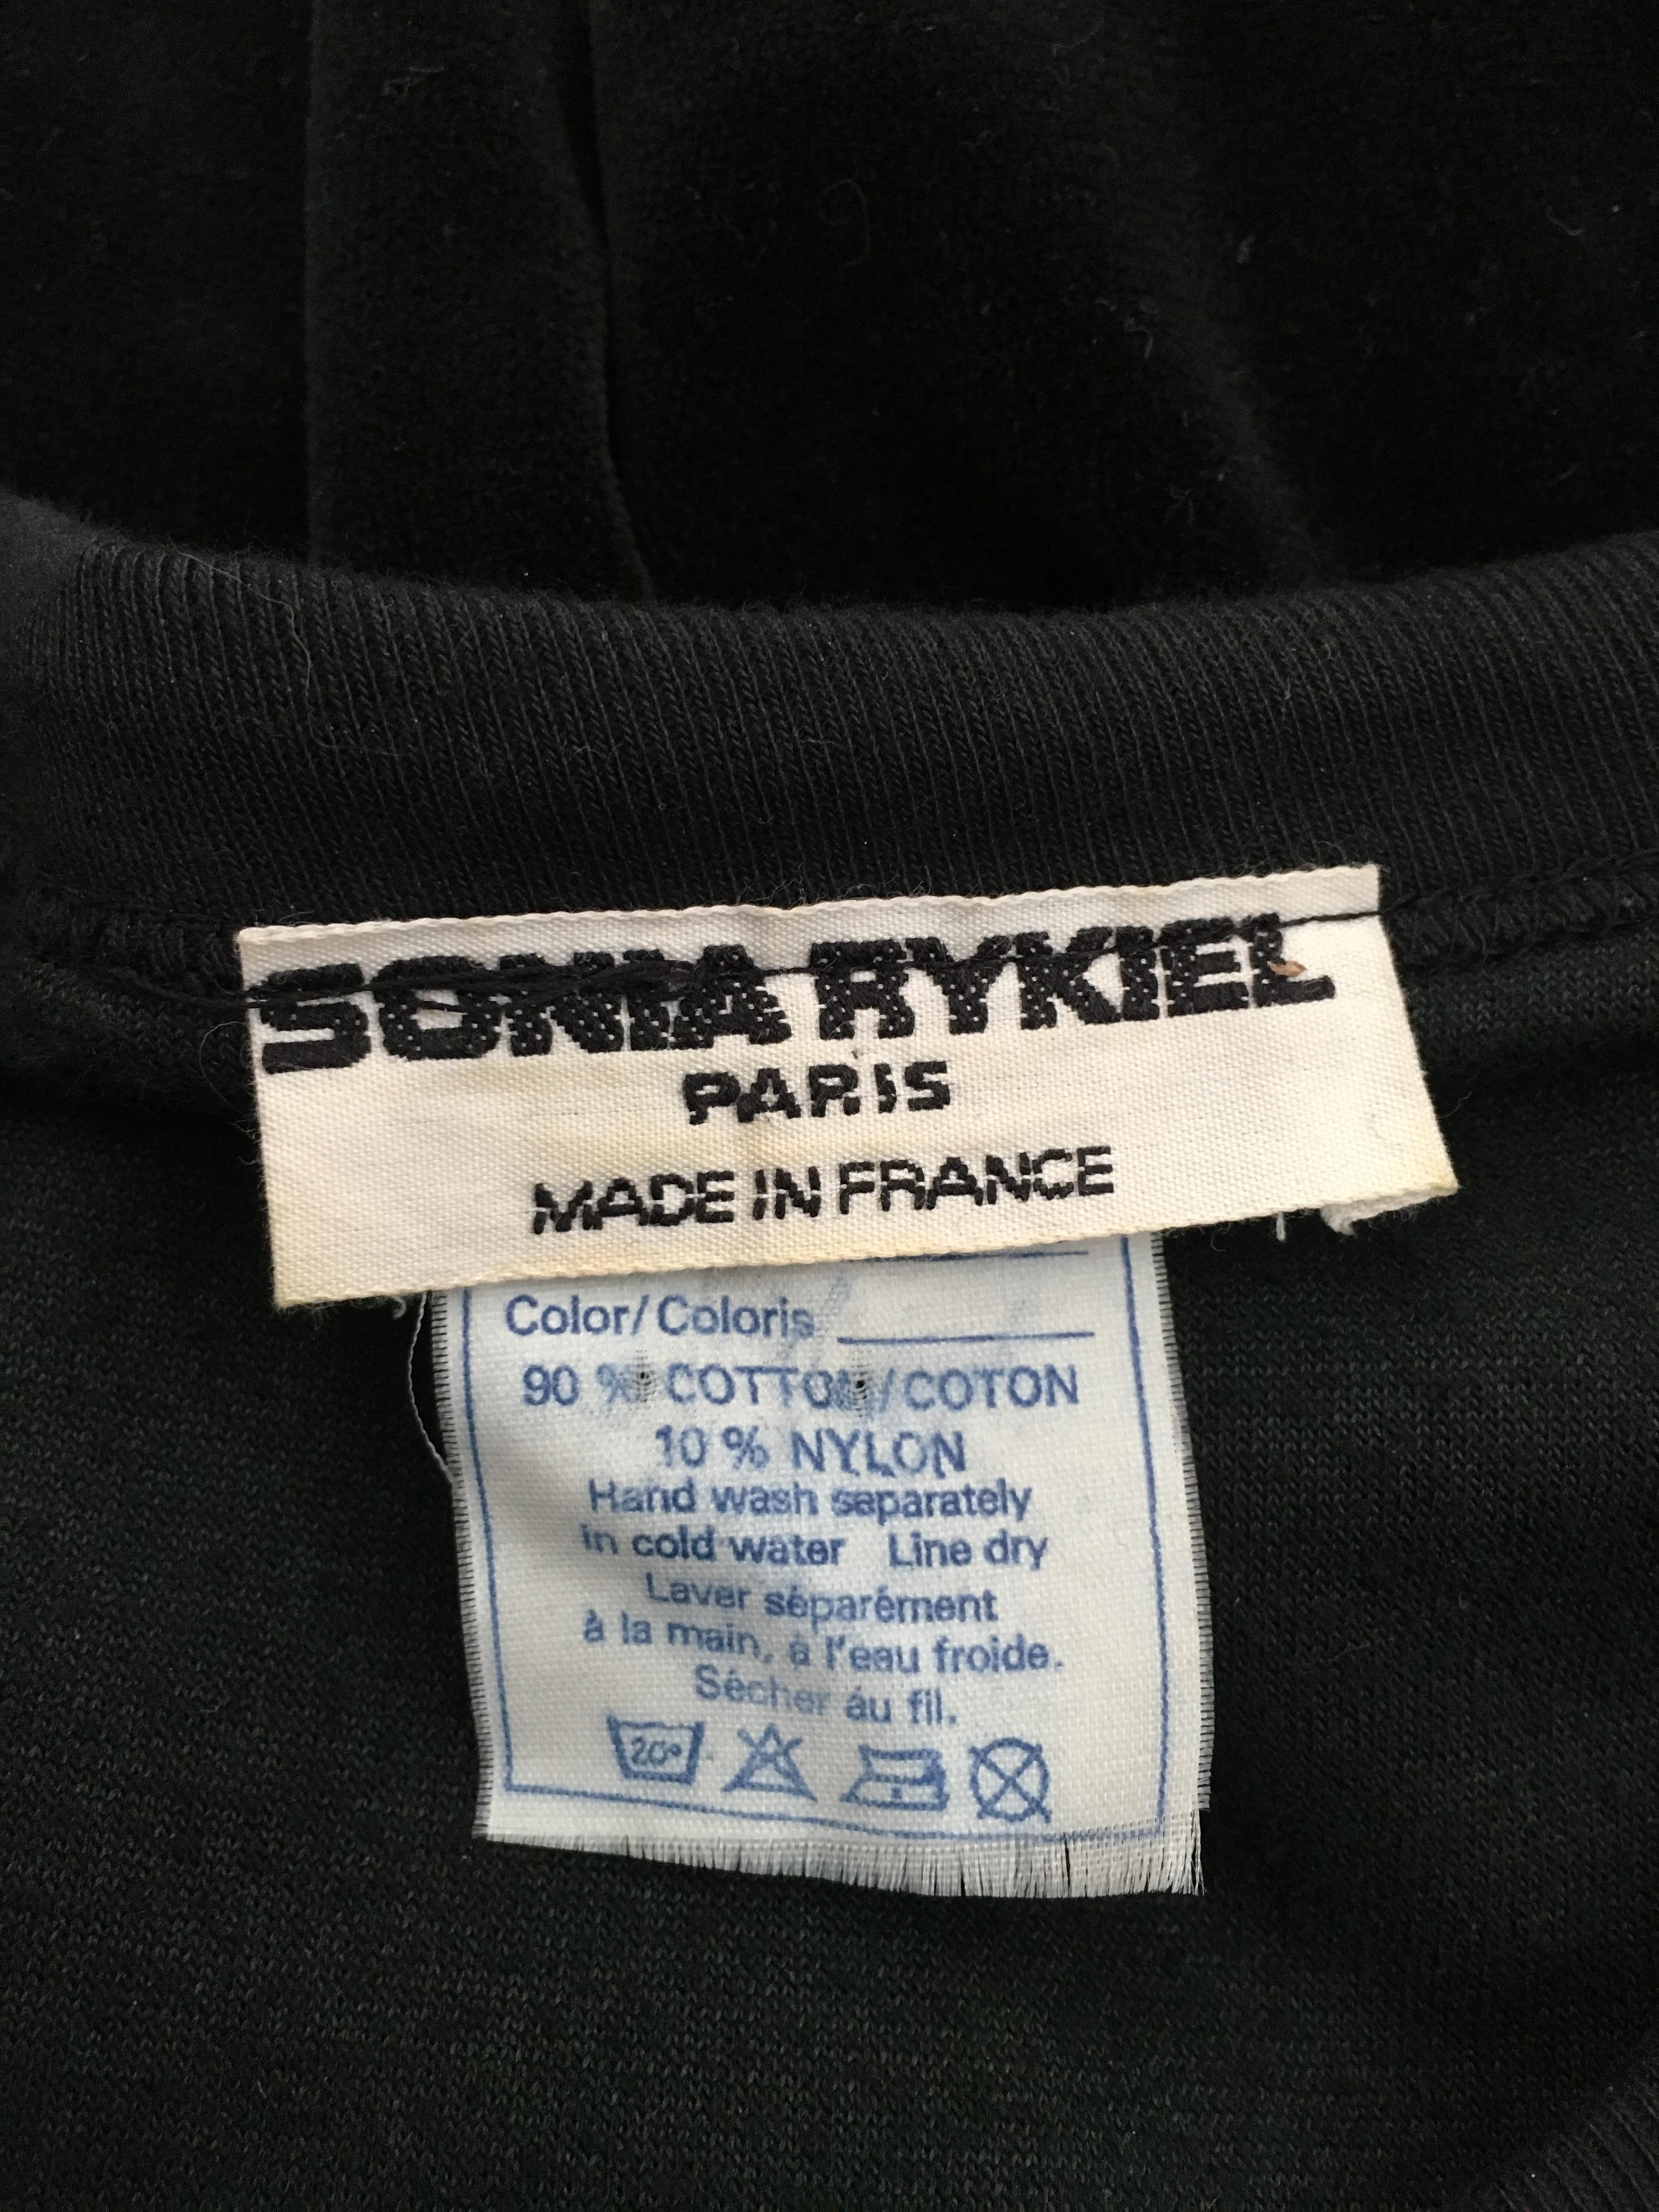 Sonia Rykiel 1980s Black Velour Dress with Pockets & Cardigan Size Large. For Sale 14